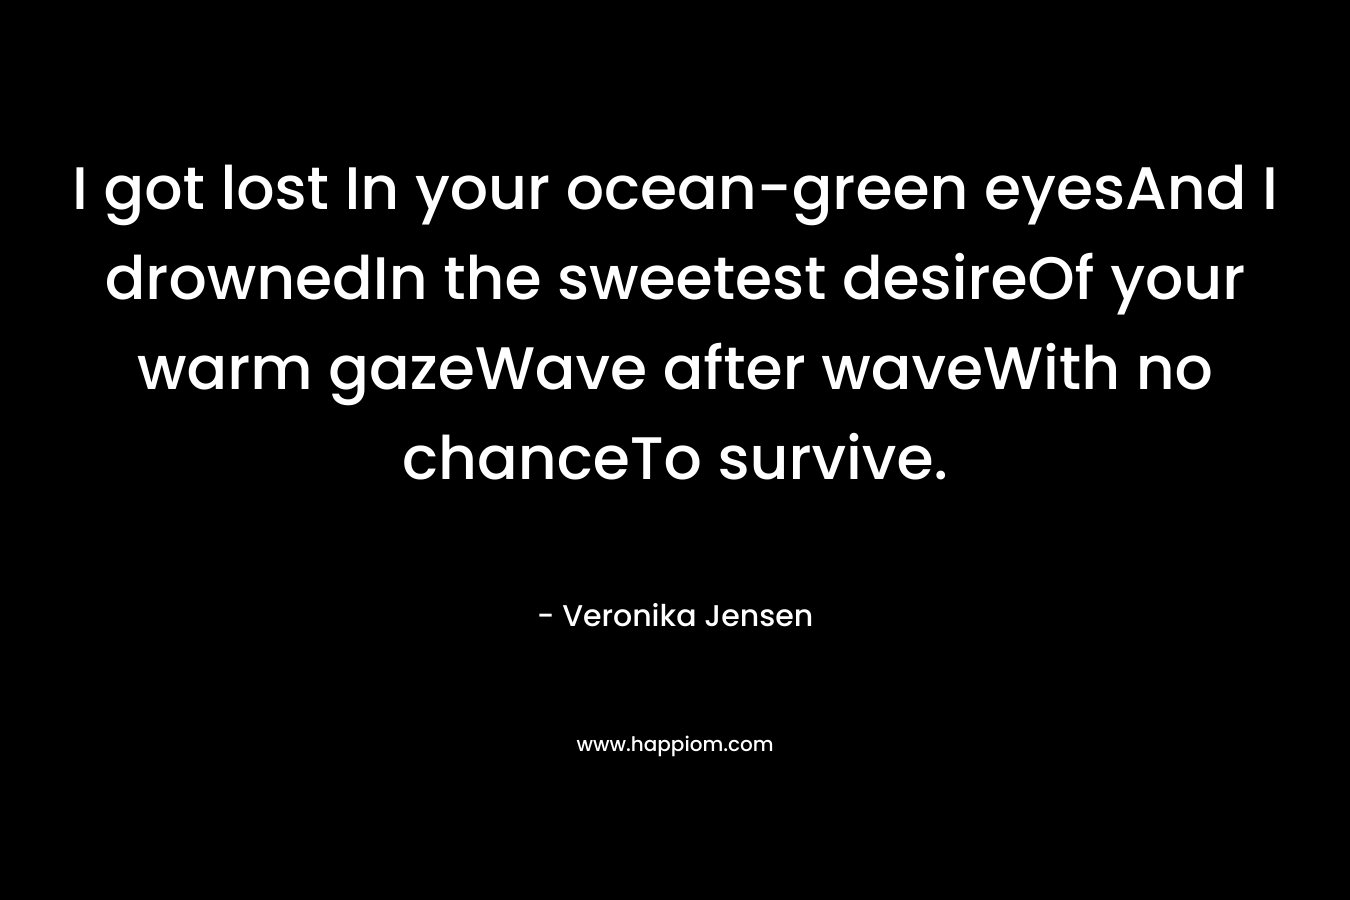 I got lost In your ocean-green eyesAnd I drownedIn the sweetest desireOf your warm gazeWave after waveWith no chanceTo survive.